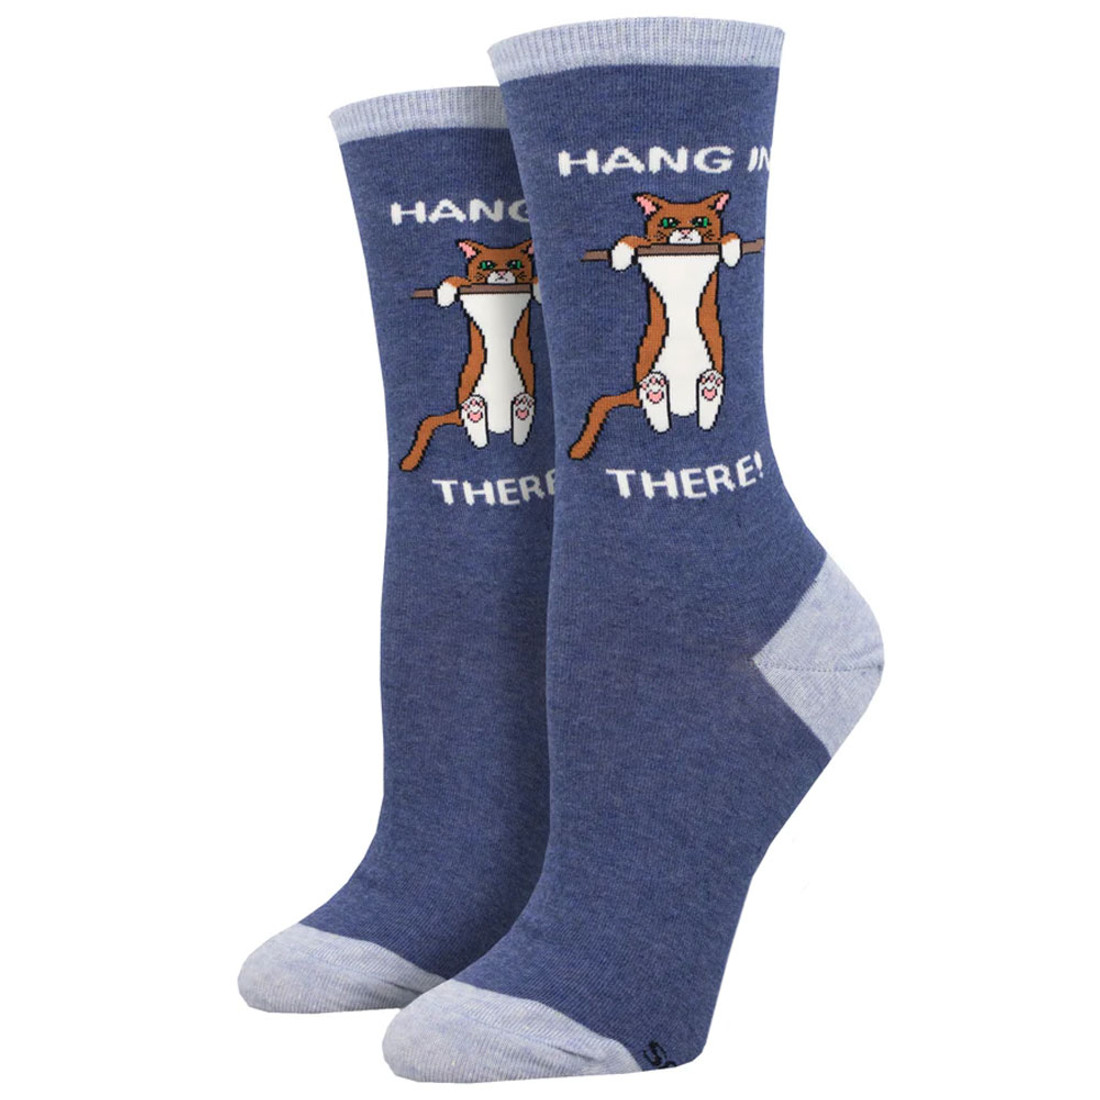 Hang In There Kitty Women's Socks